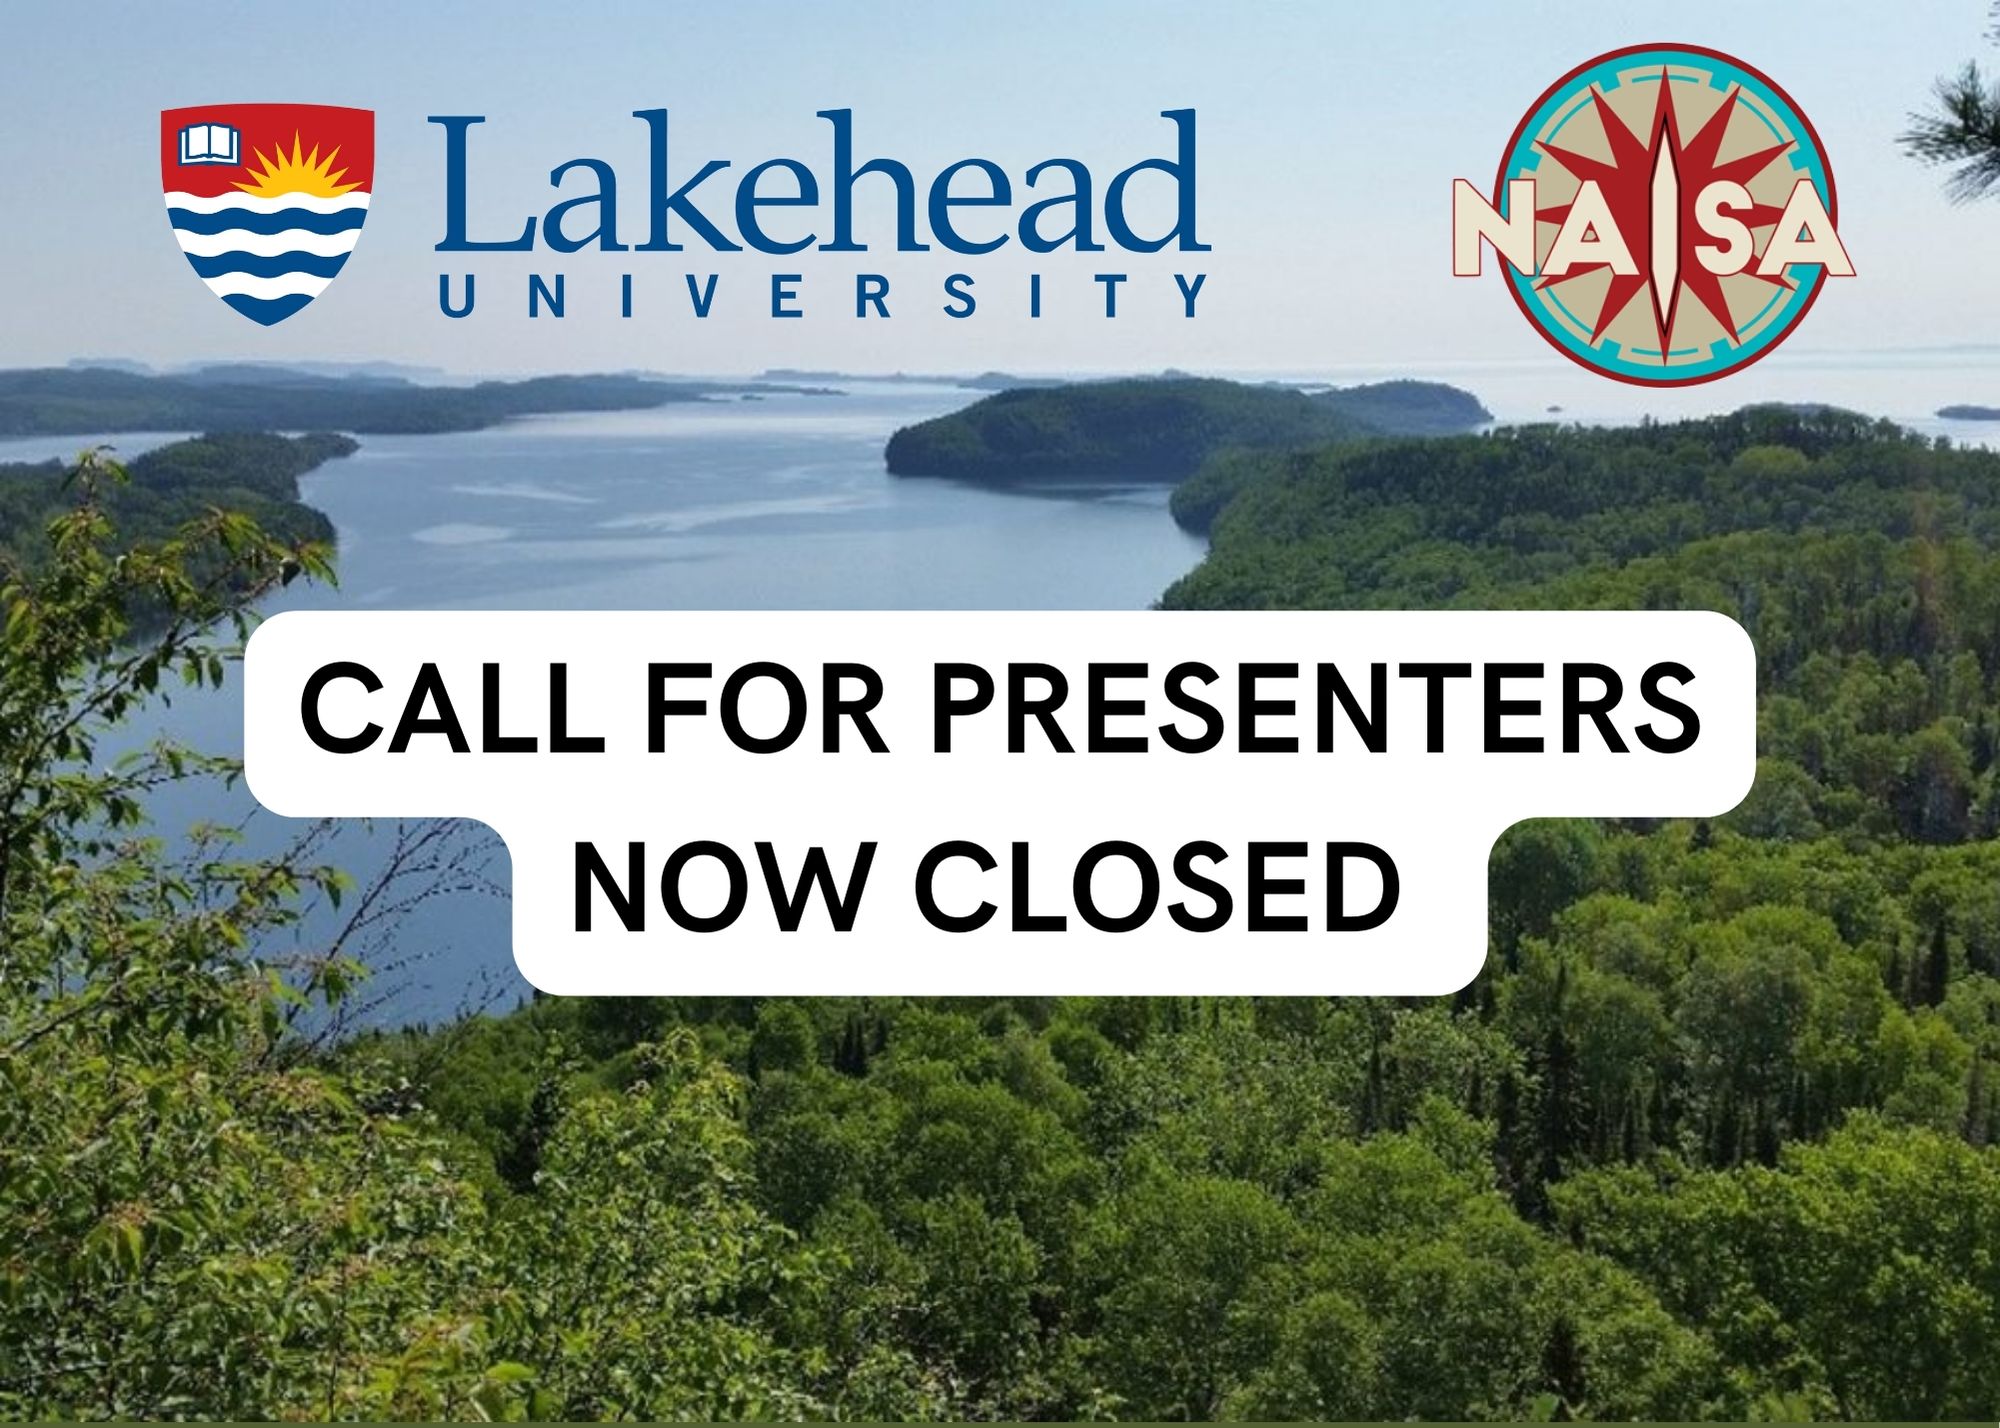 Call for Presenters Now Closed